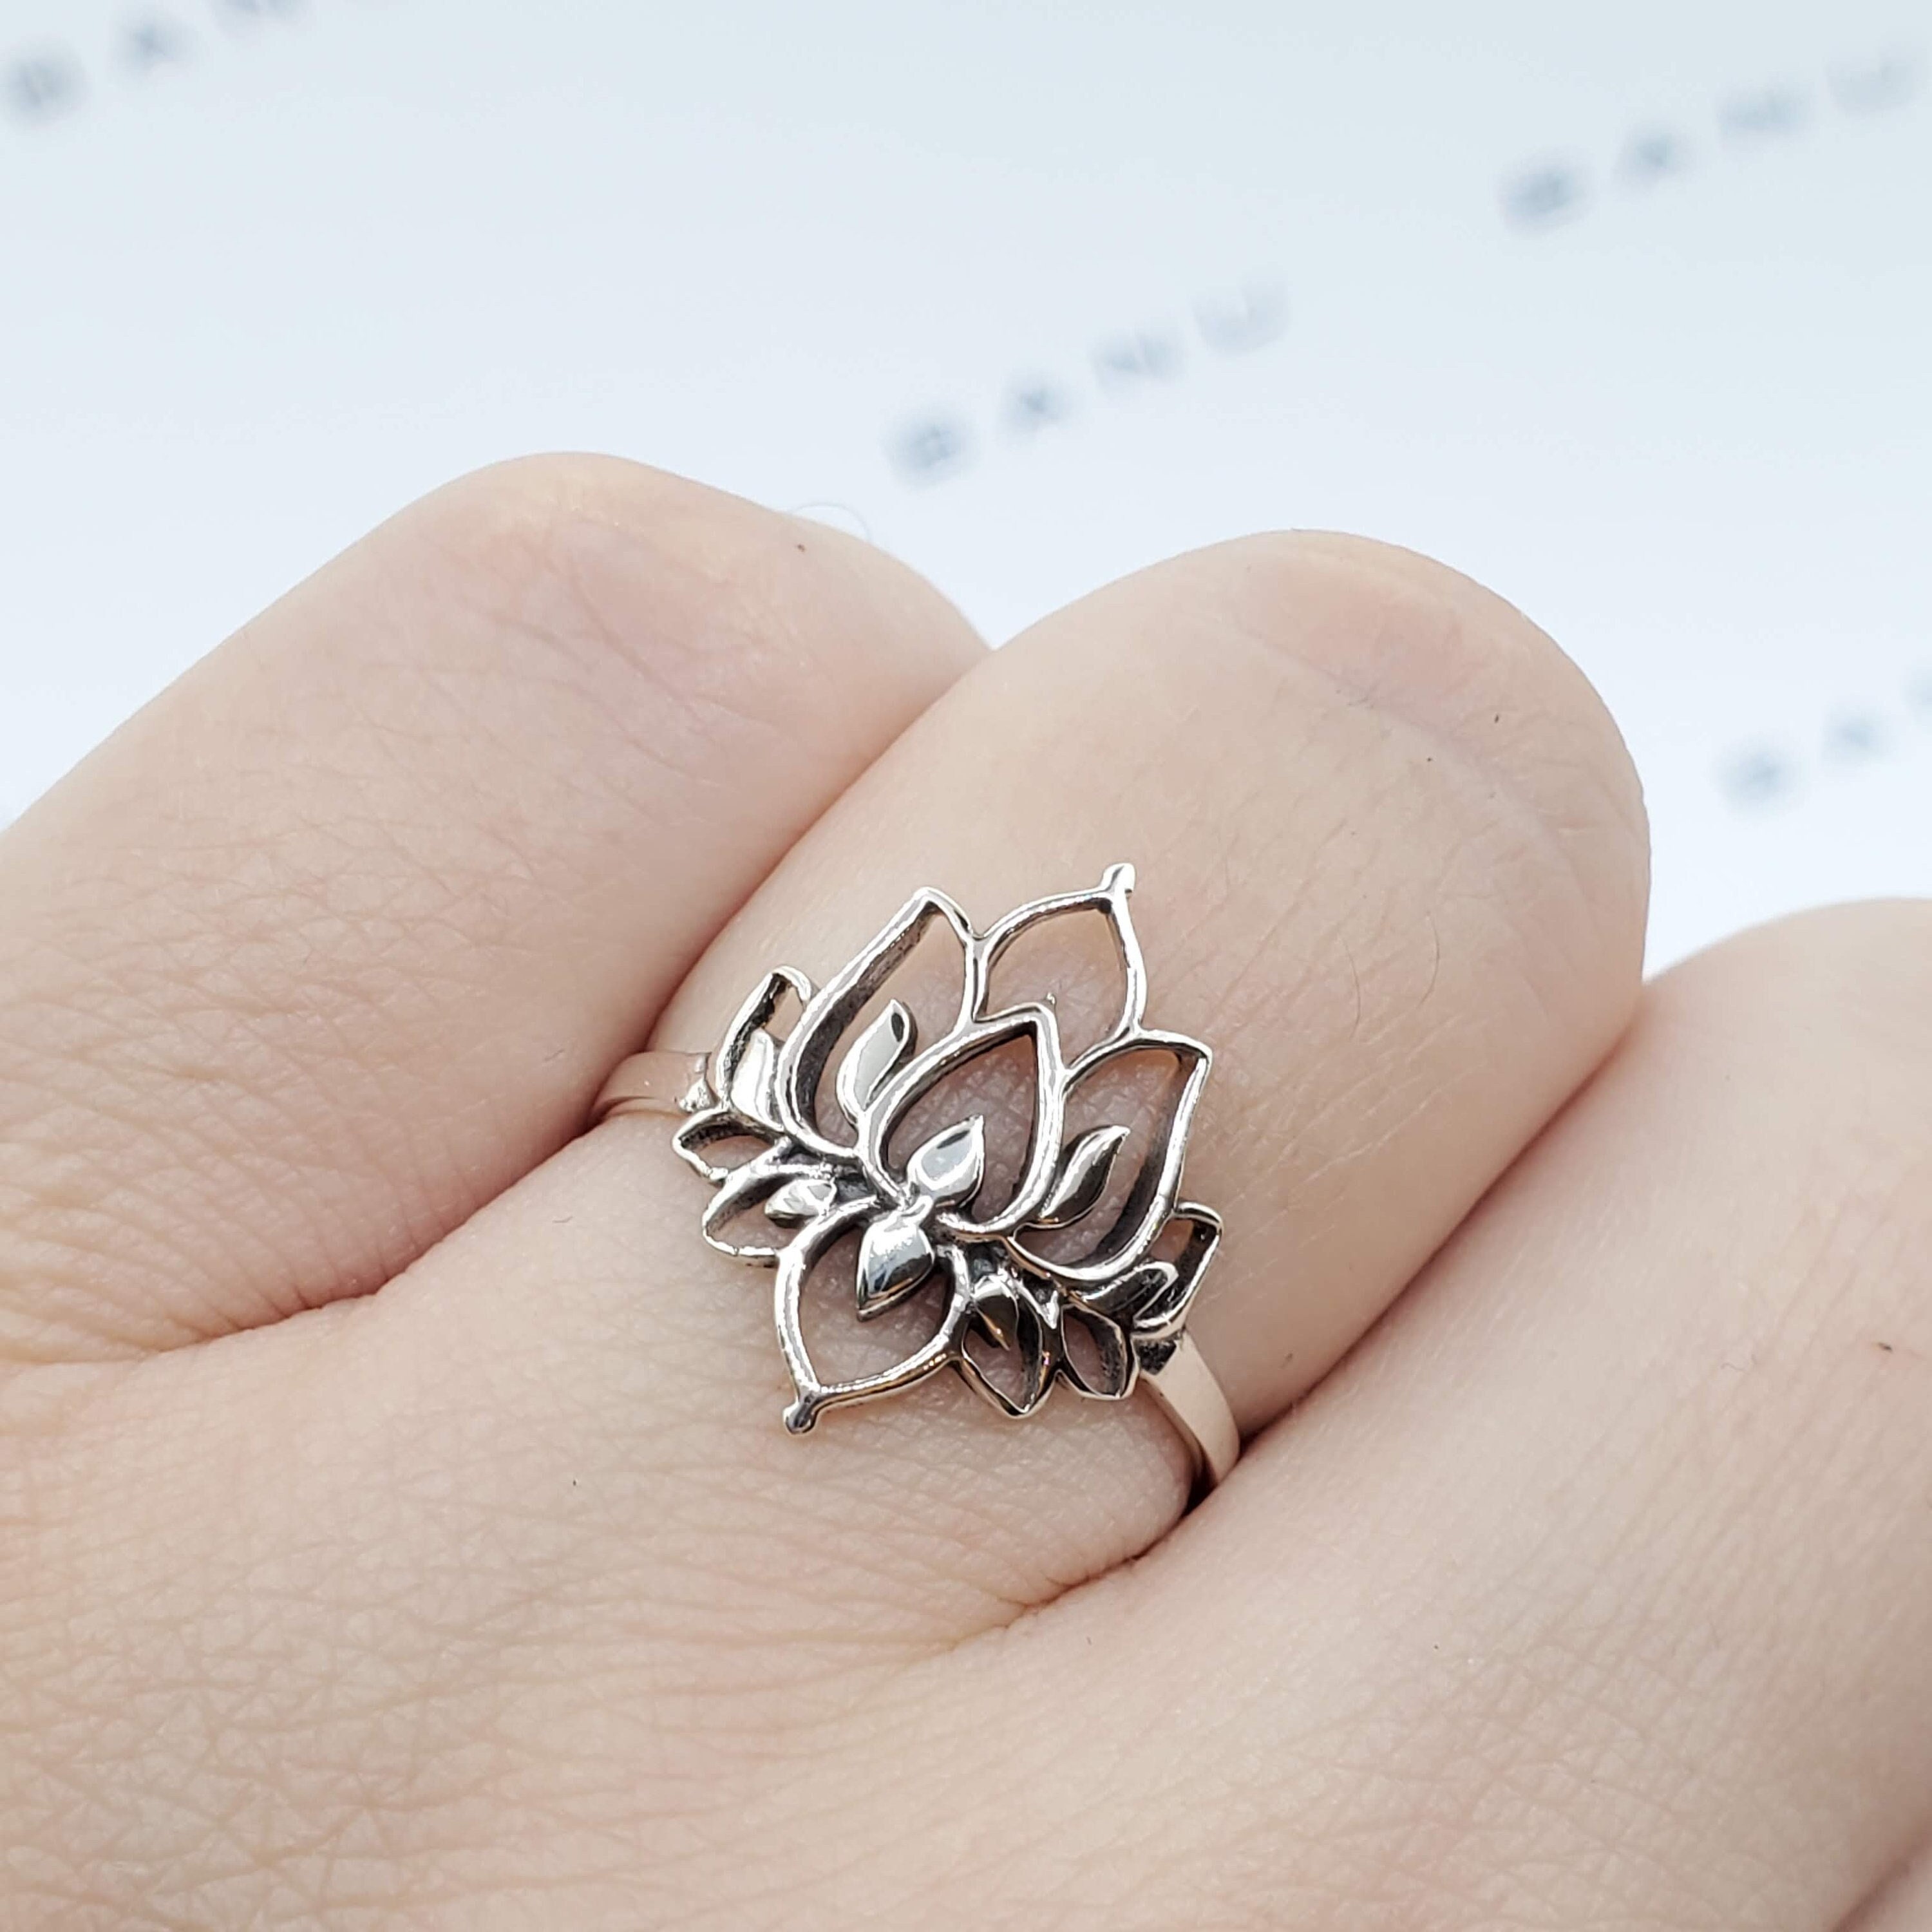 Wholesale Sterling Silver Lotus Flower Ring for Sale - Wholesale Sparkle